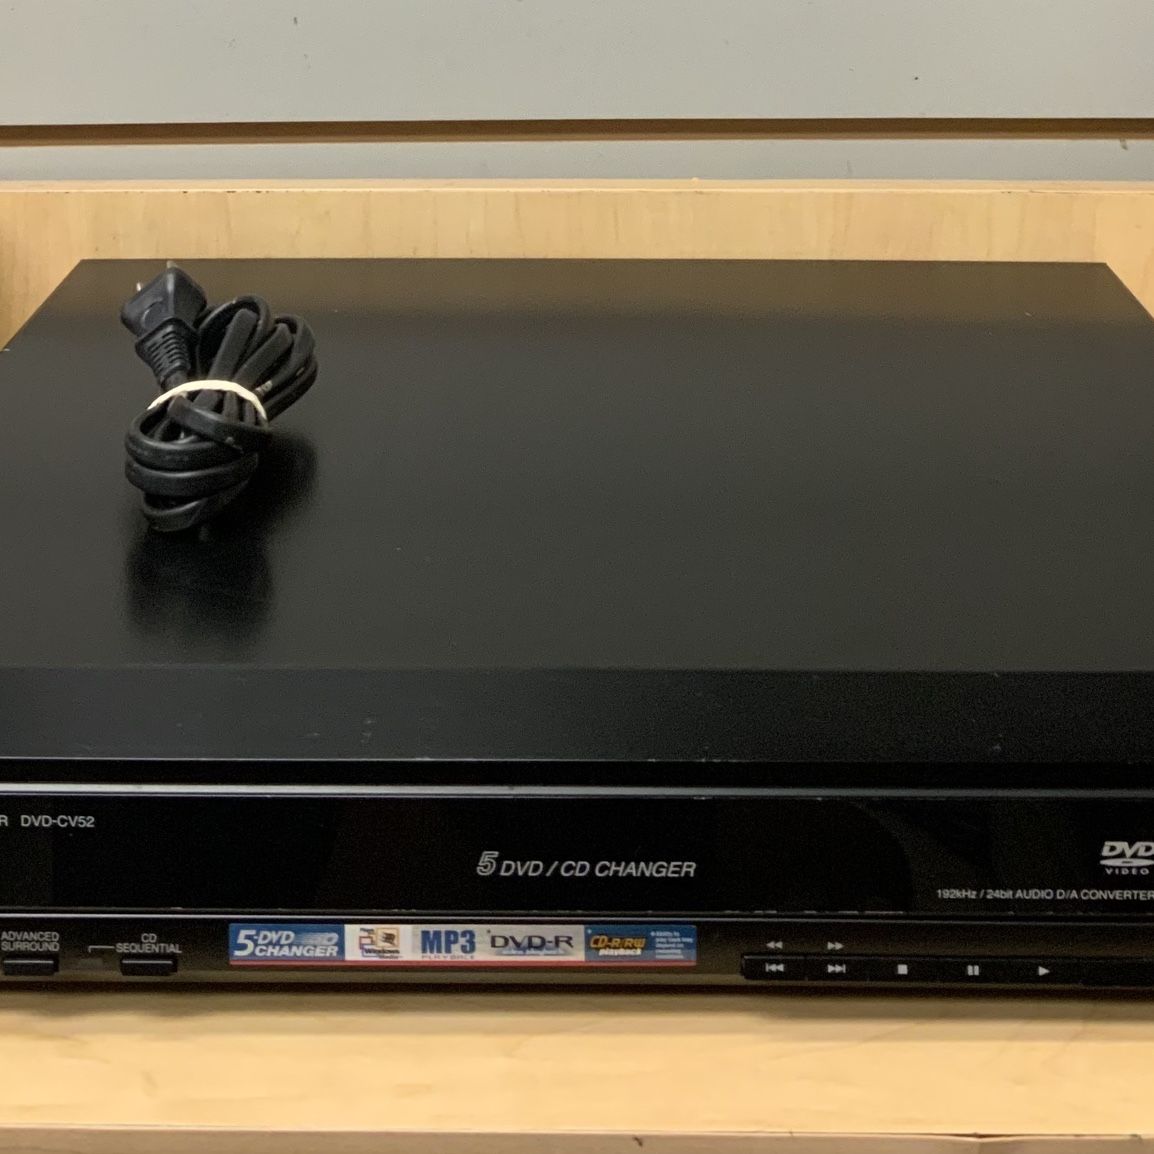 PANASONIC DVD - CV52 - 5 Disc DVD CD Carousel Changer Player With Cord For Movies & Music- No Remote 